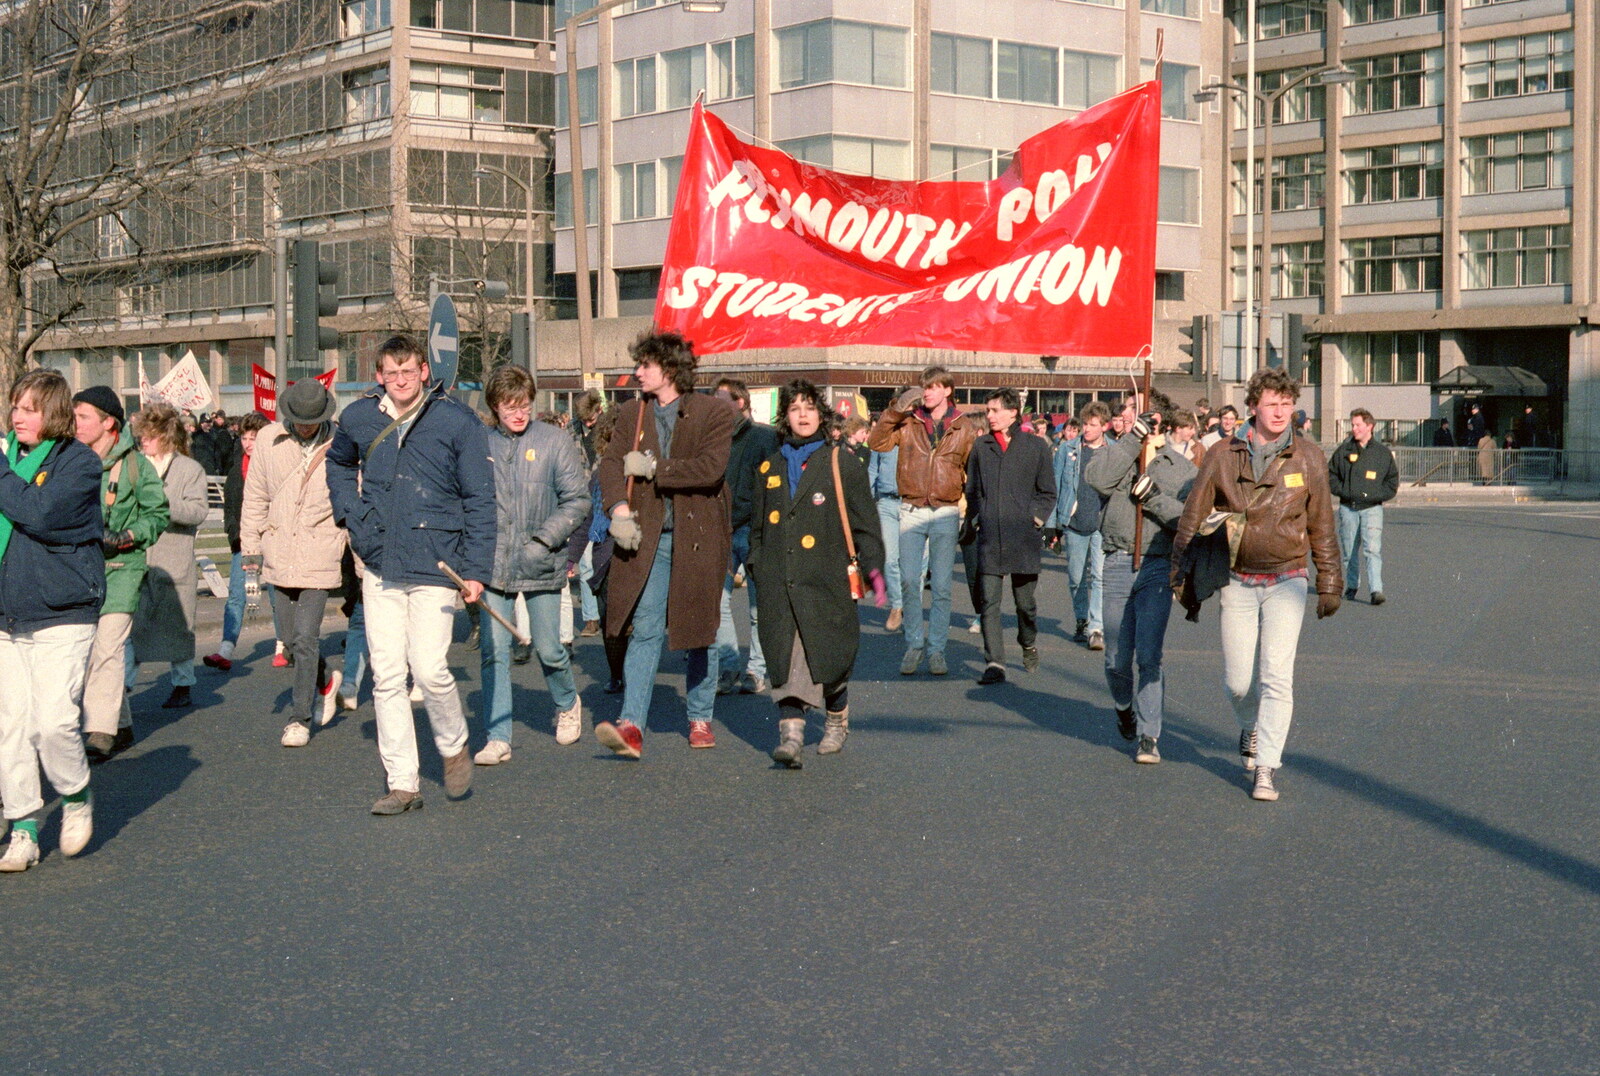 More Plymouth Poly banner waving from Uni: No Chance Fowler! A student Demonstration, London - 26th February 1986